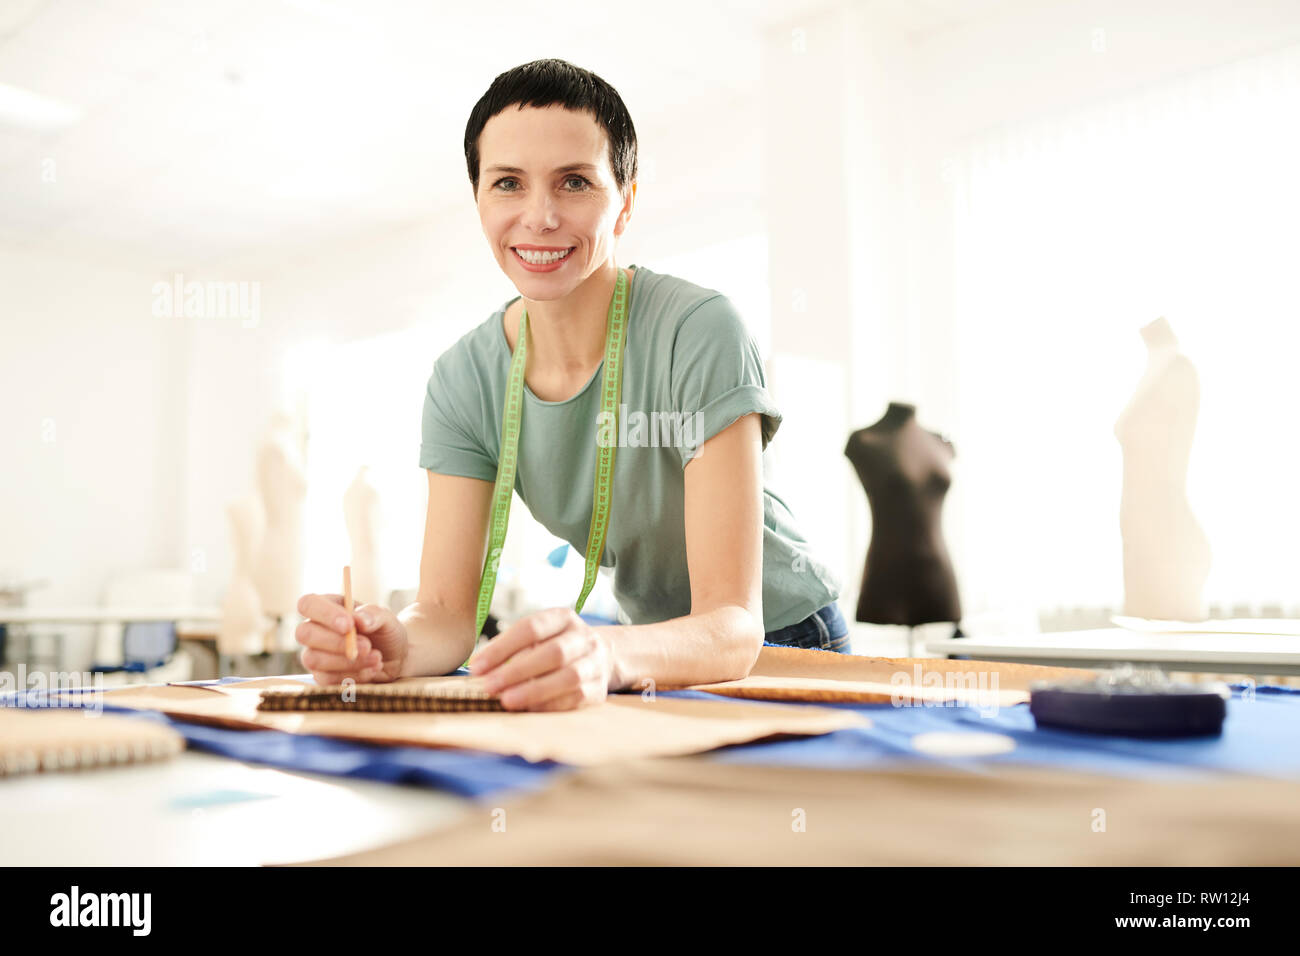 Professional in tailoring Stock Photo